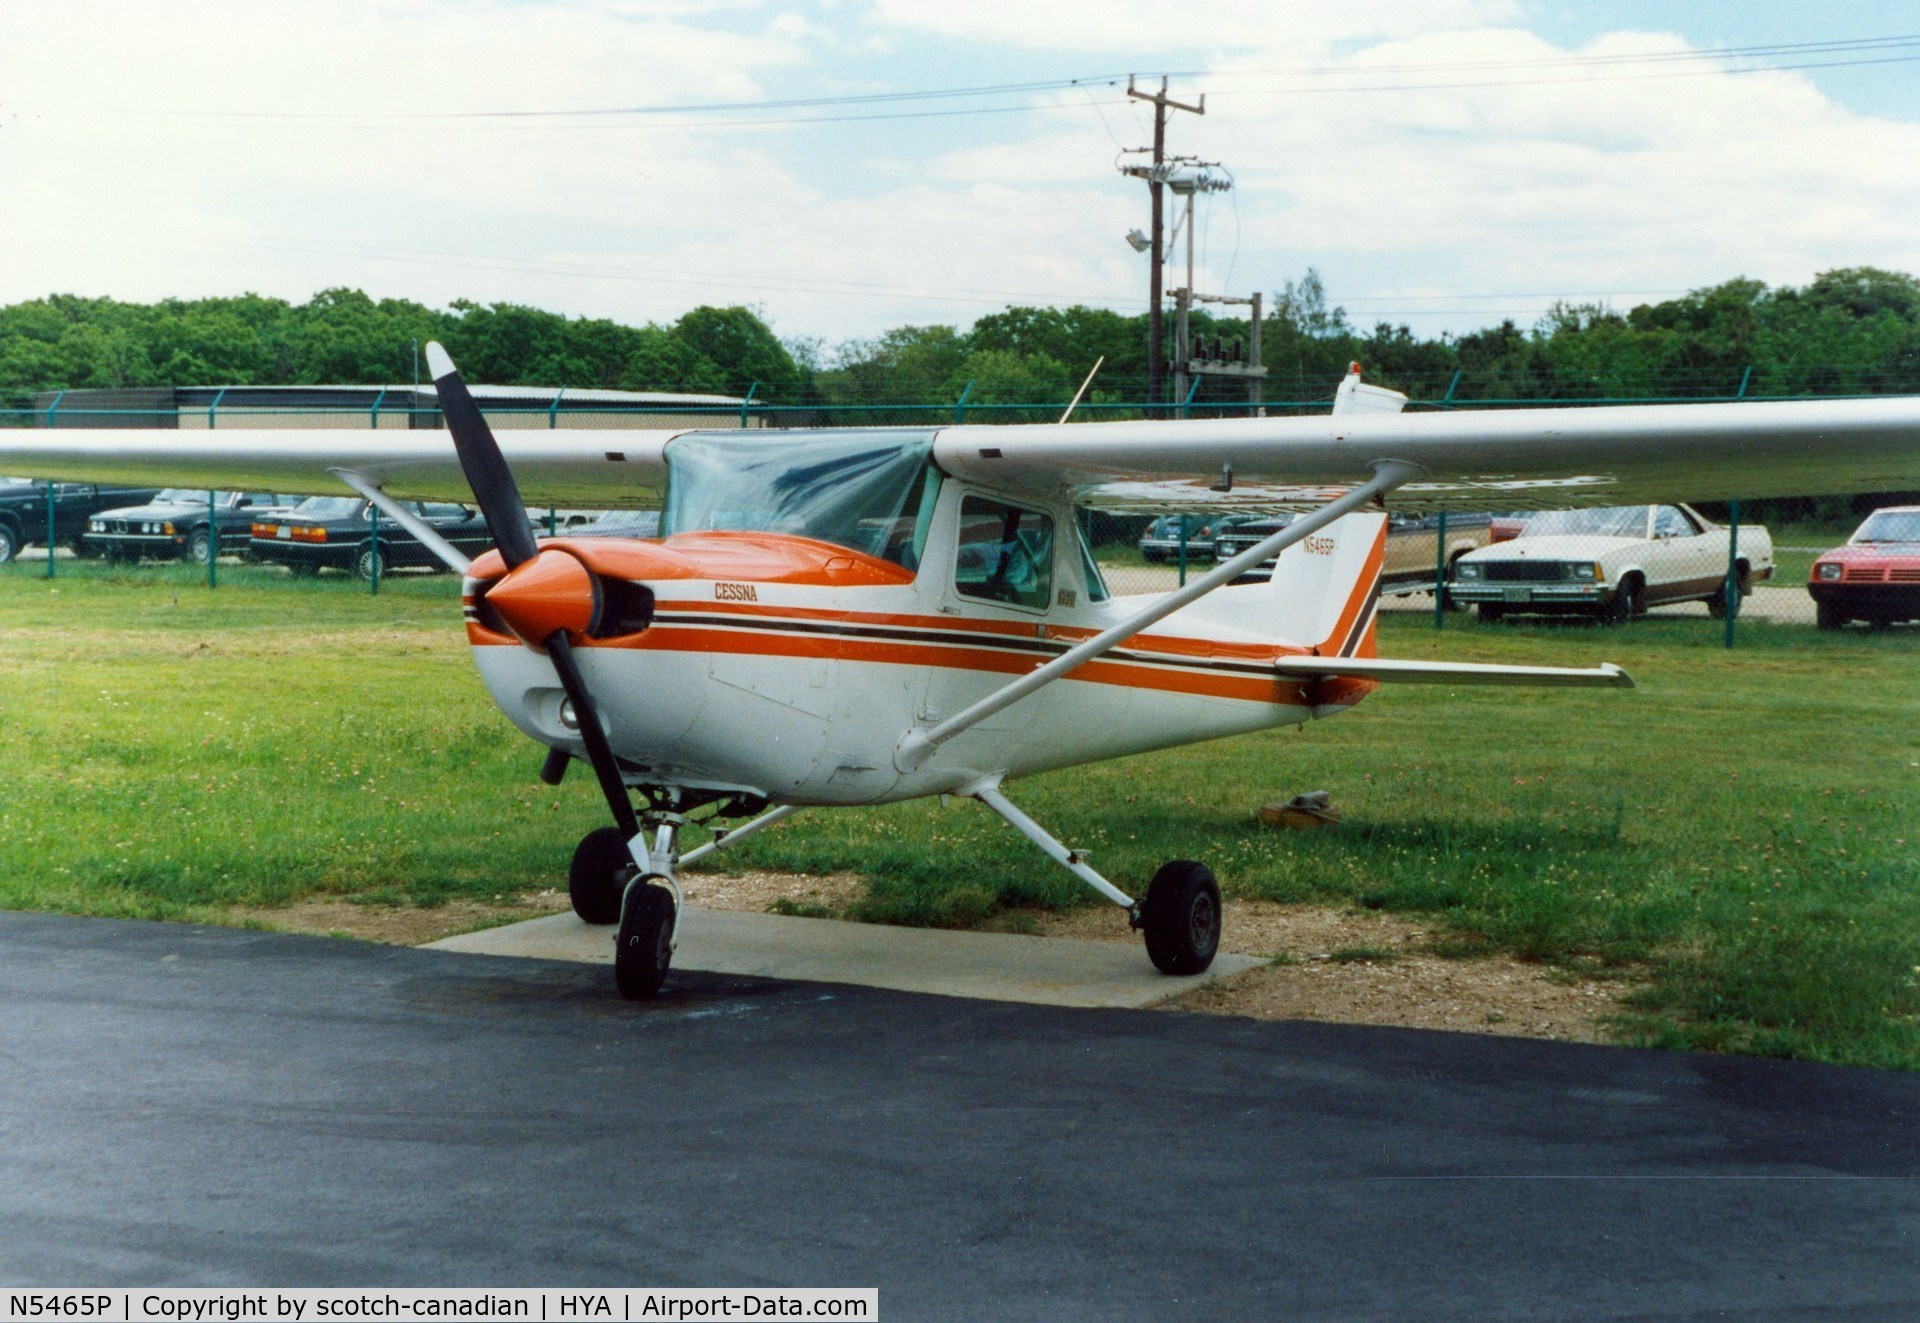 N5465P, Cessna 152 C/N 15284952, Cessna 152 N5465P at Barnstable Municipal Airport, Hyannis, MA - July 1986